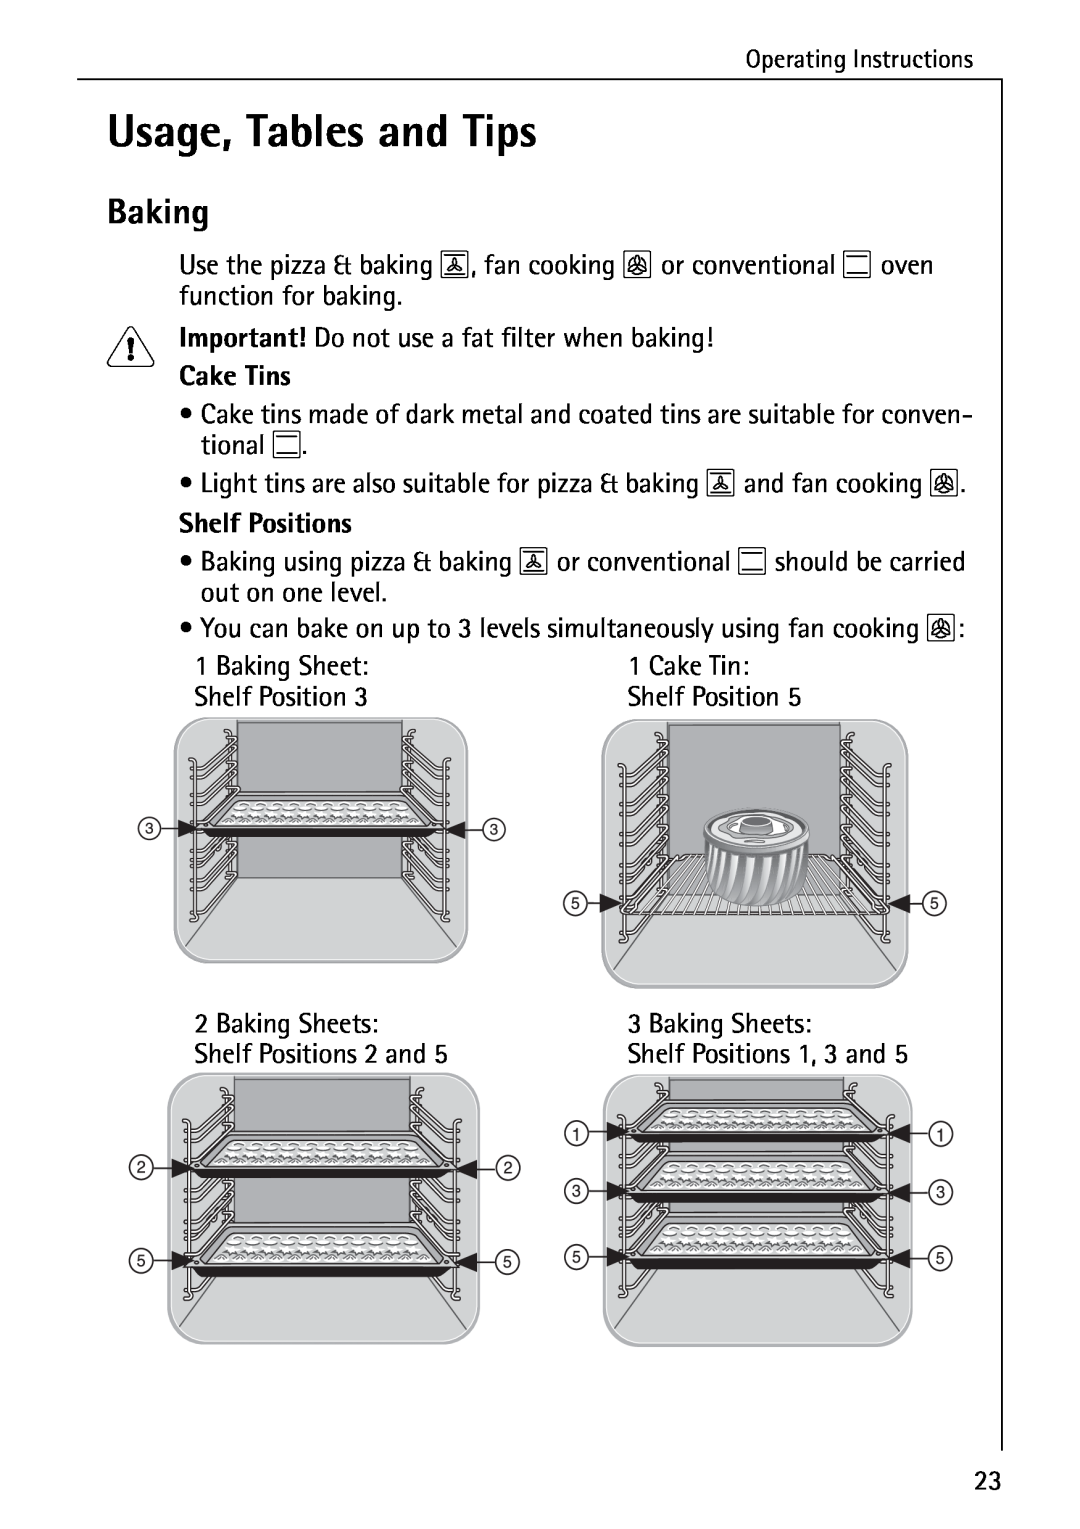 AEG B 4100 operating instructions Usage, Tables and Tips, Baking, Cake Tins, Shelf Positions 